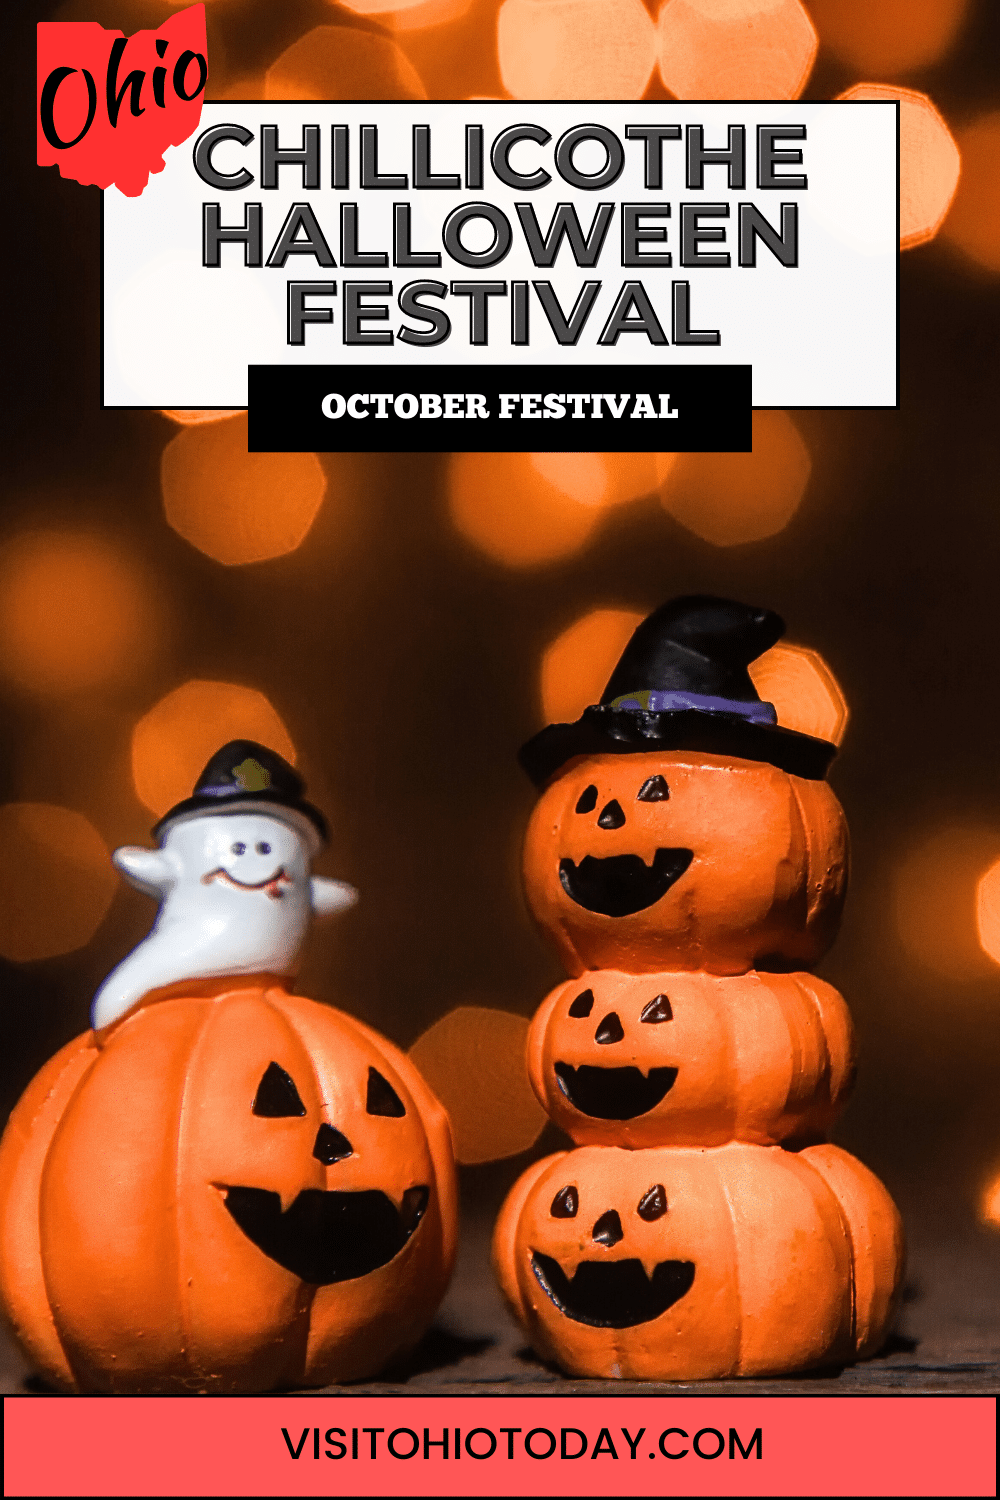 Taking place at Yoctangee Park from October 13th to 15th, this festival is a weekend packed full of fun events with the Halloween atmosphere!